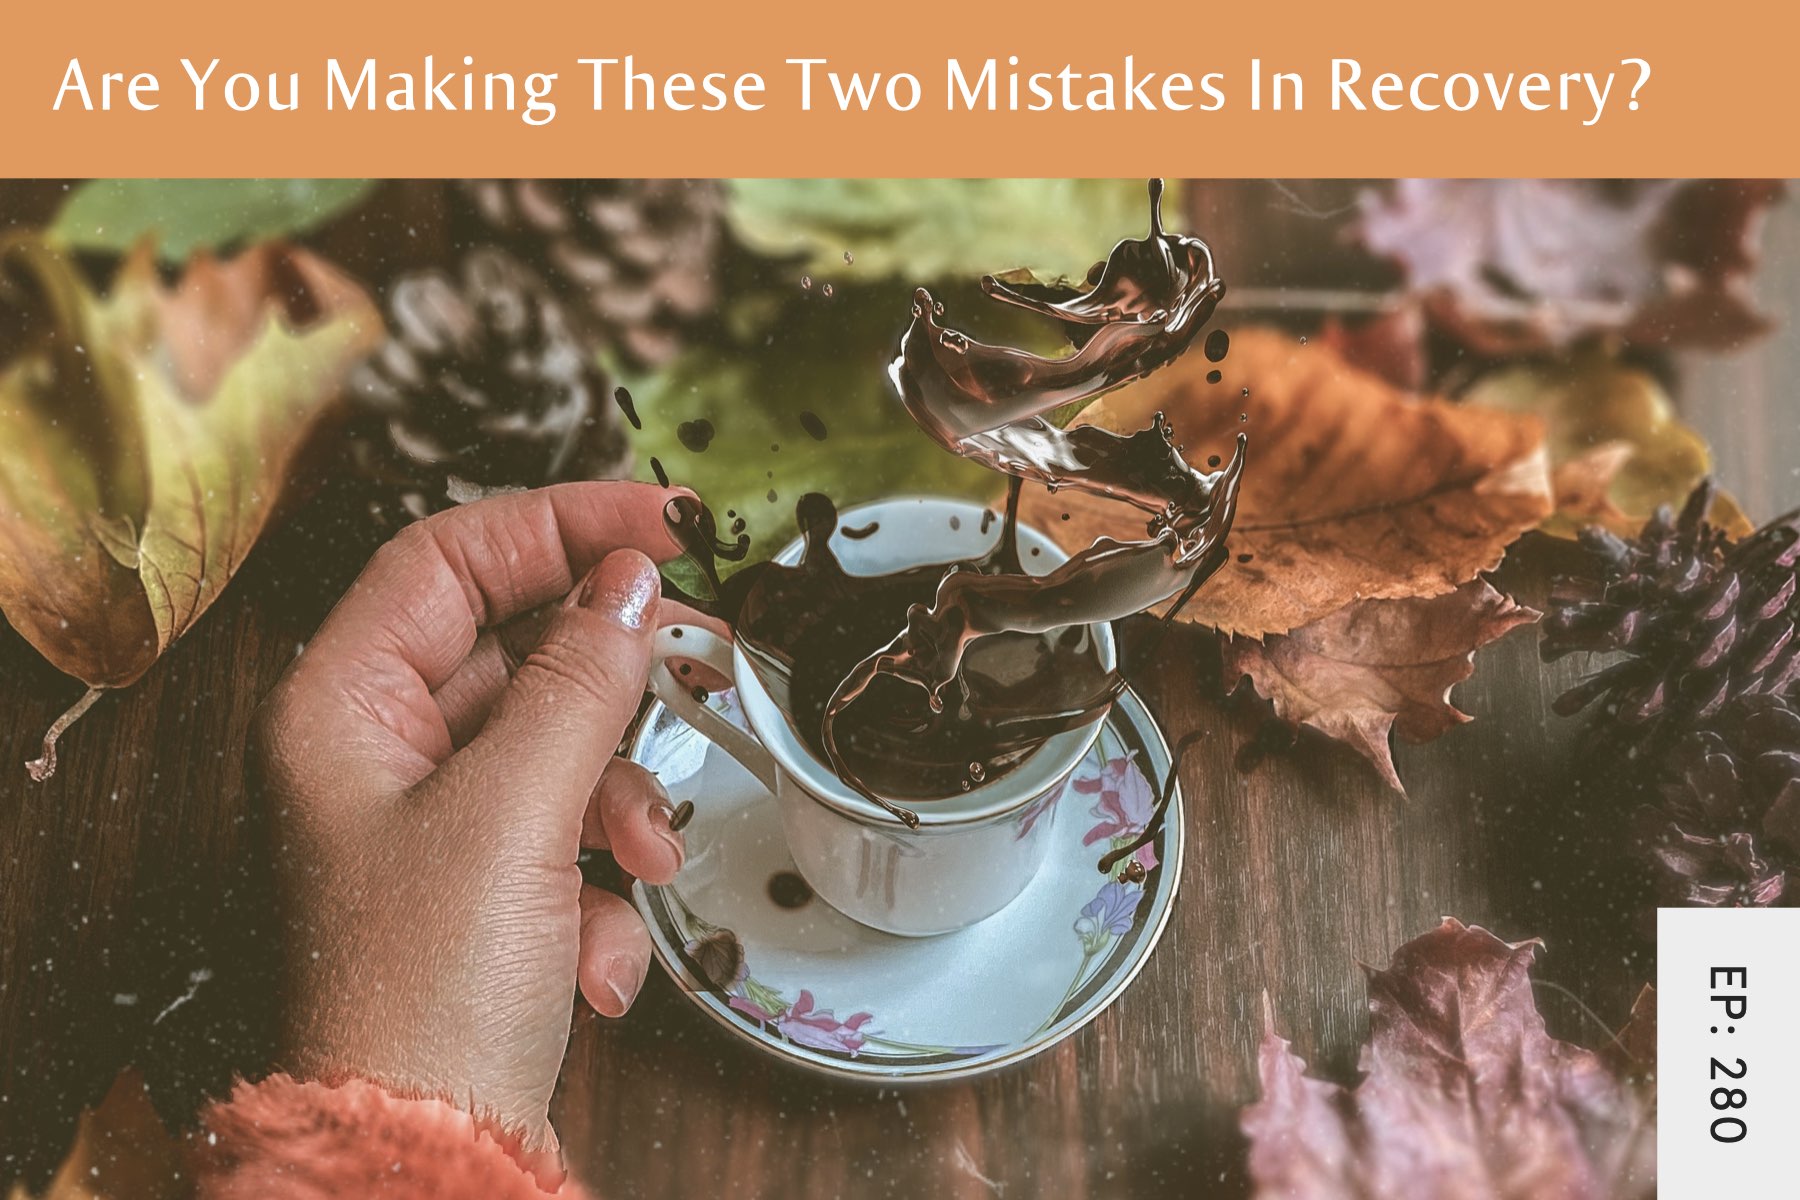 280: Are You Making These Two Mistakes In Recovery? - Seven Health: Eating Disorder Recovery and Anti Diet Nutritionist